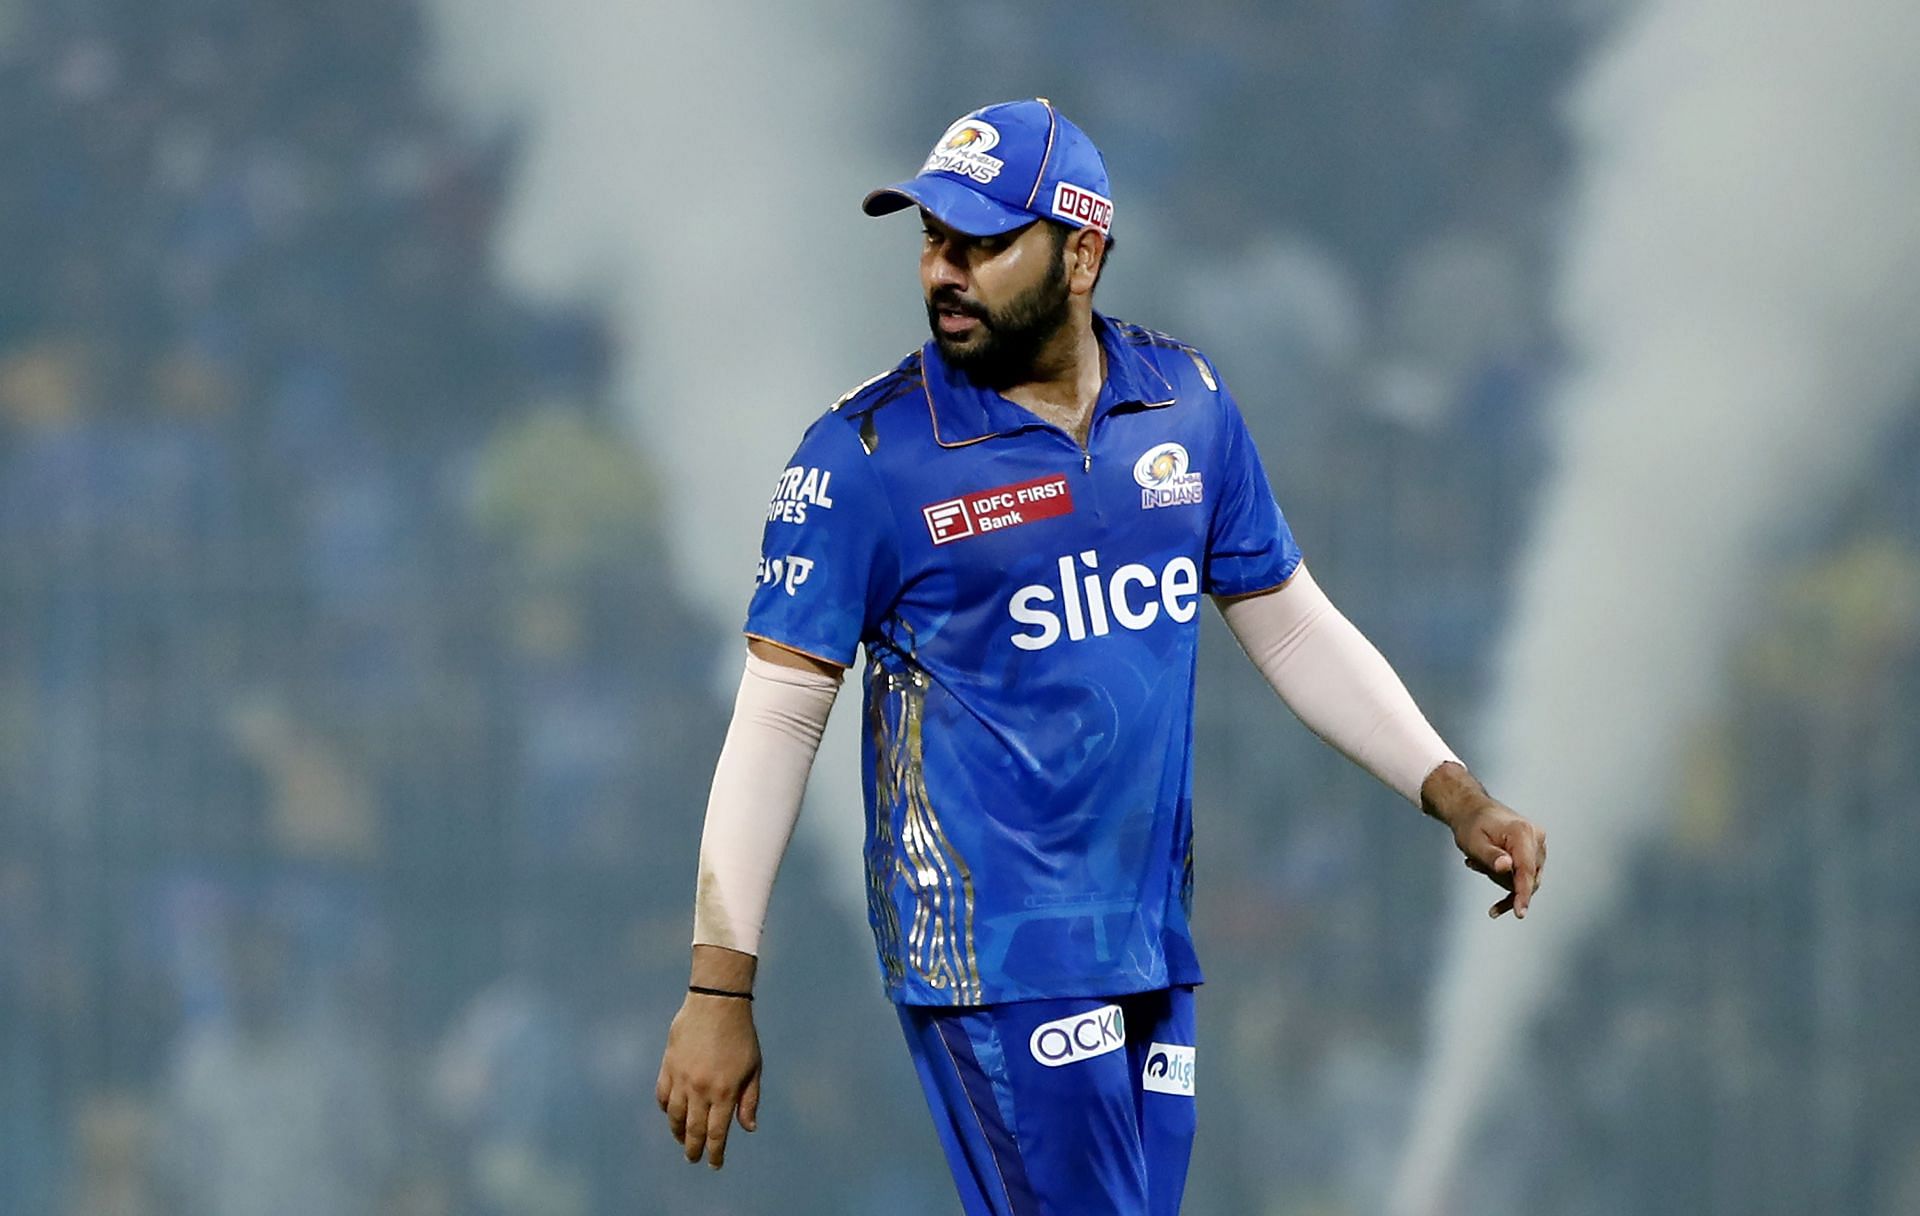 Under Rohit Sharma, Mumbai Indians have won the IPL five times. (Pic: Getty Images)